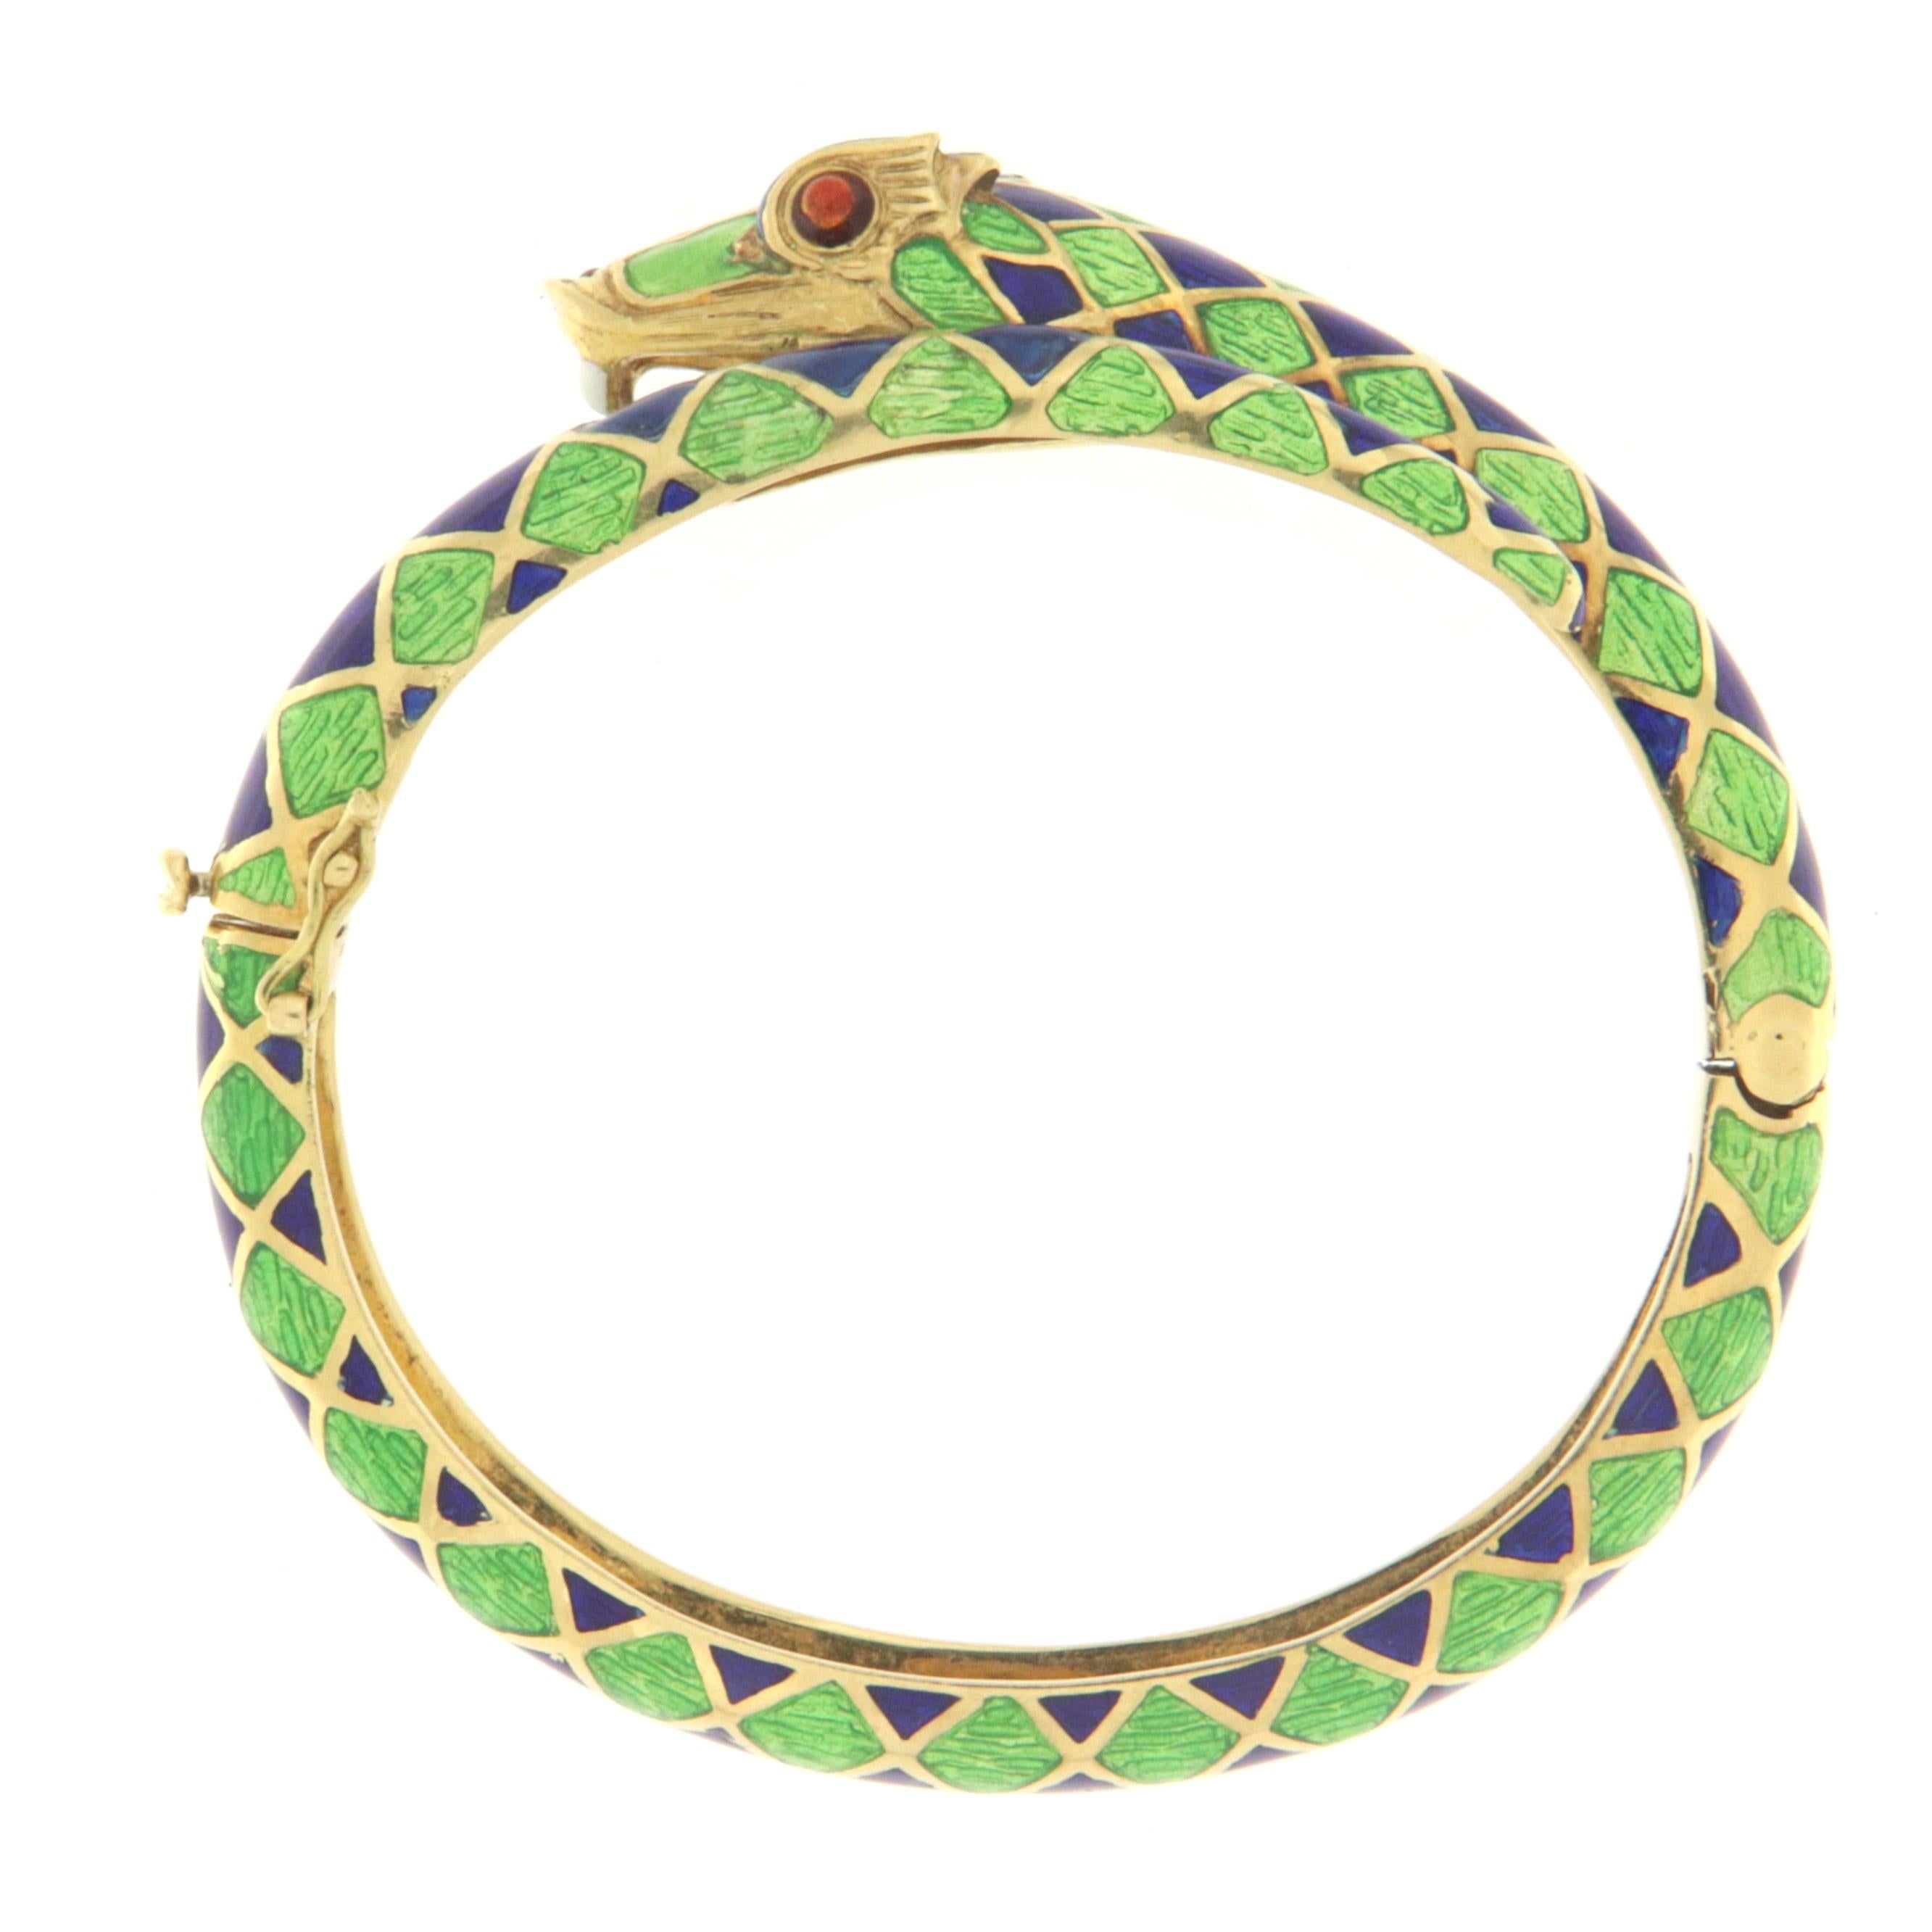 Beautiful 18 karat yellow gold snake bracelet with green,blue and red enamel.
Snake-shaped jewels always have a particular charm and denote grace, seduction and mystery. In many civilizations, in fact, the snake has had very important meanings,